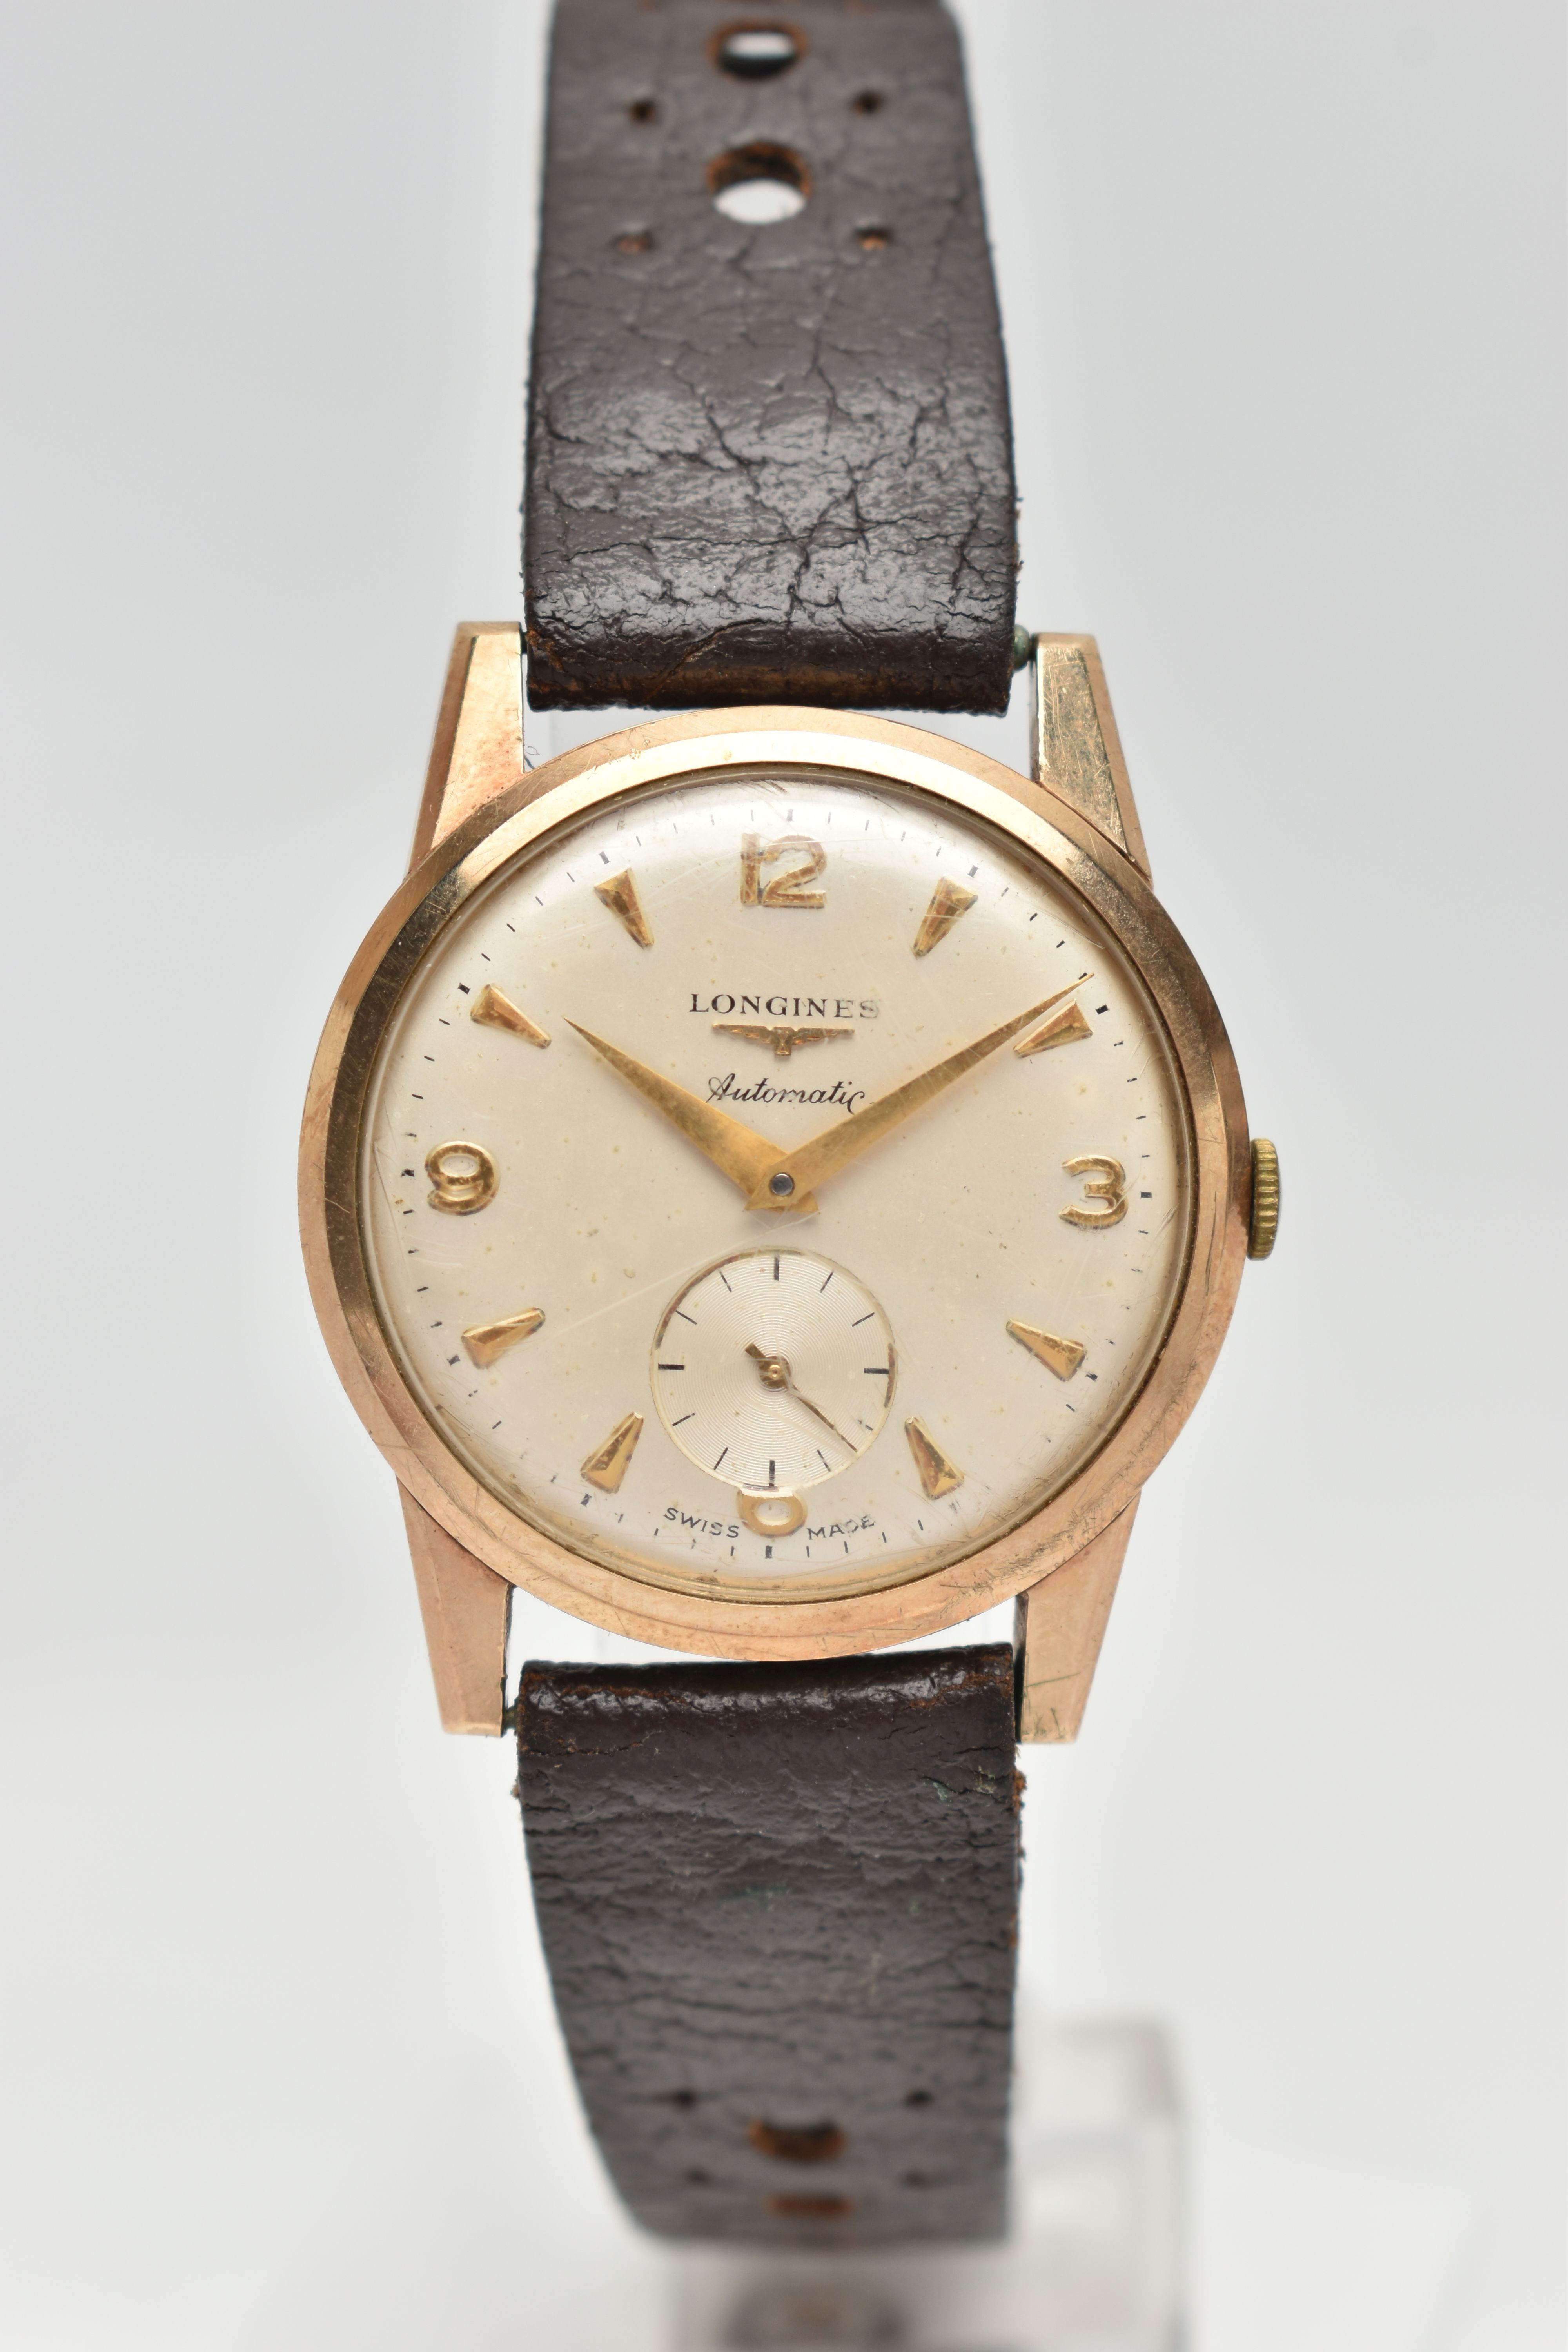 A GENTS 9CT GOLD 'LONGINES' AUTOMATIC WRISTWATCH, round silver dial signed 'Longines Automatic'